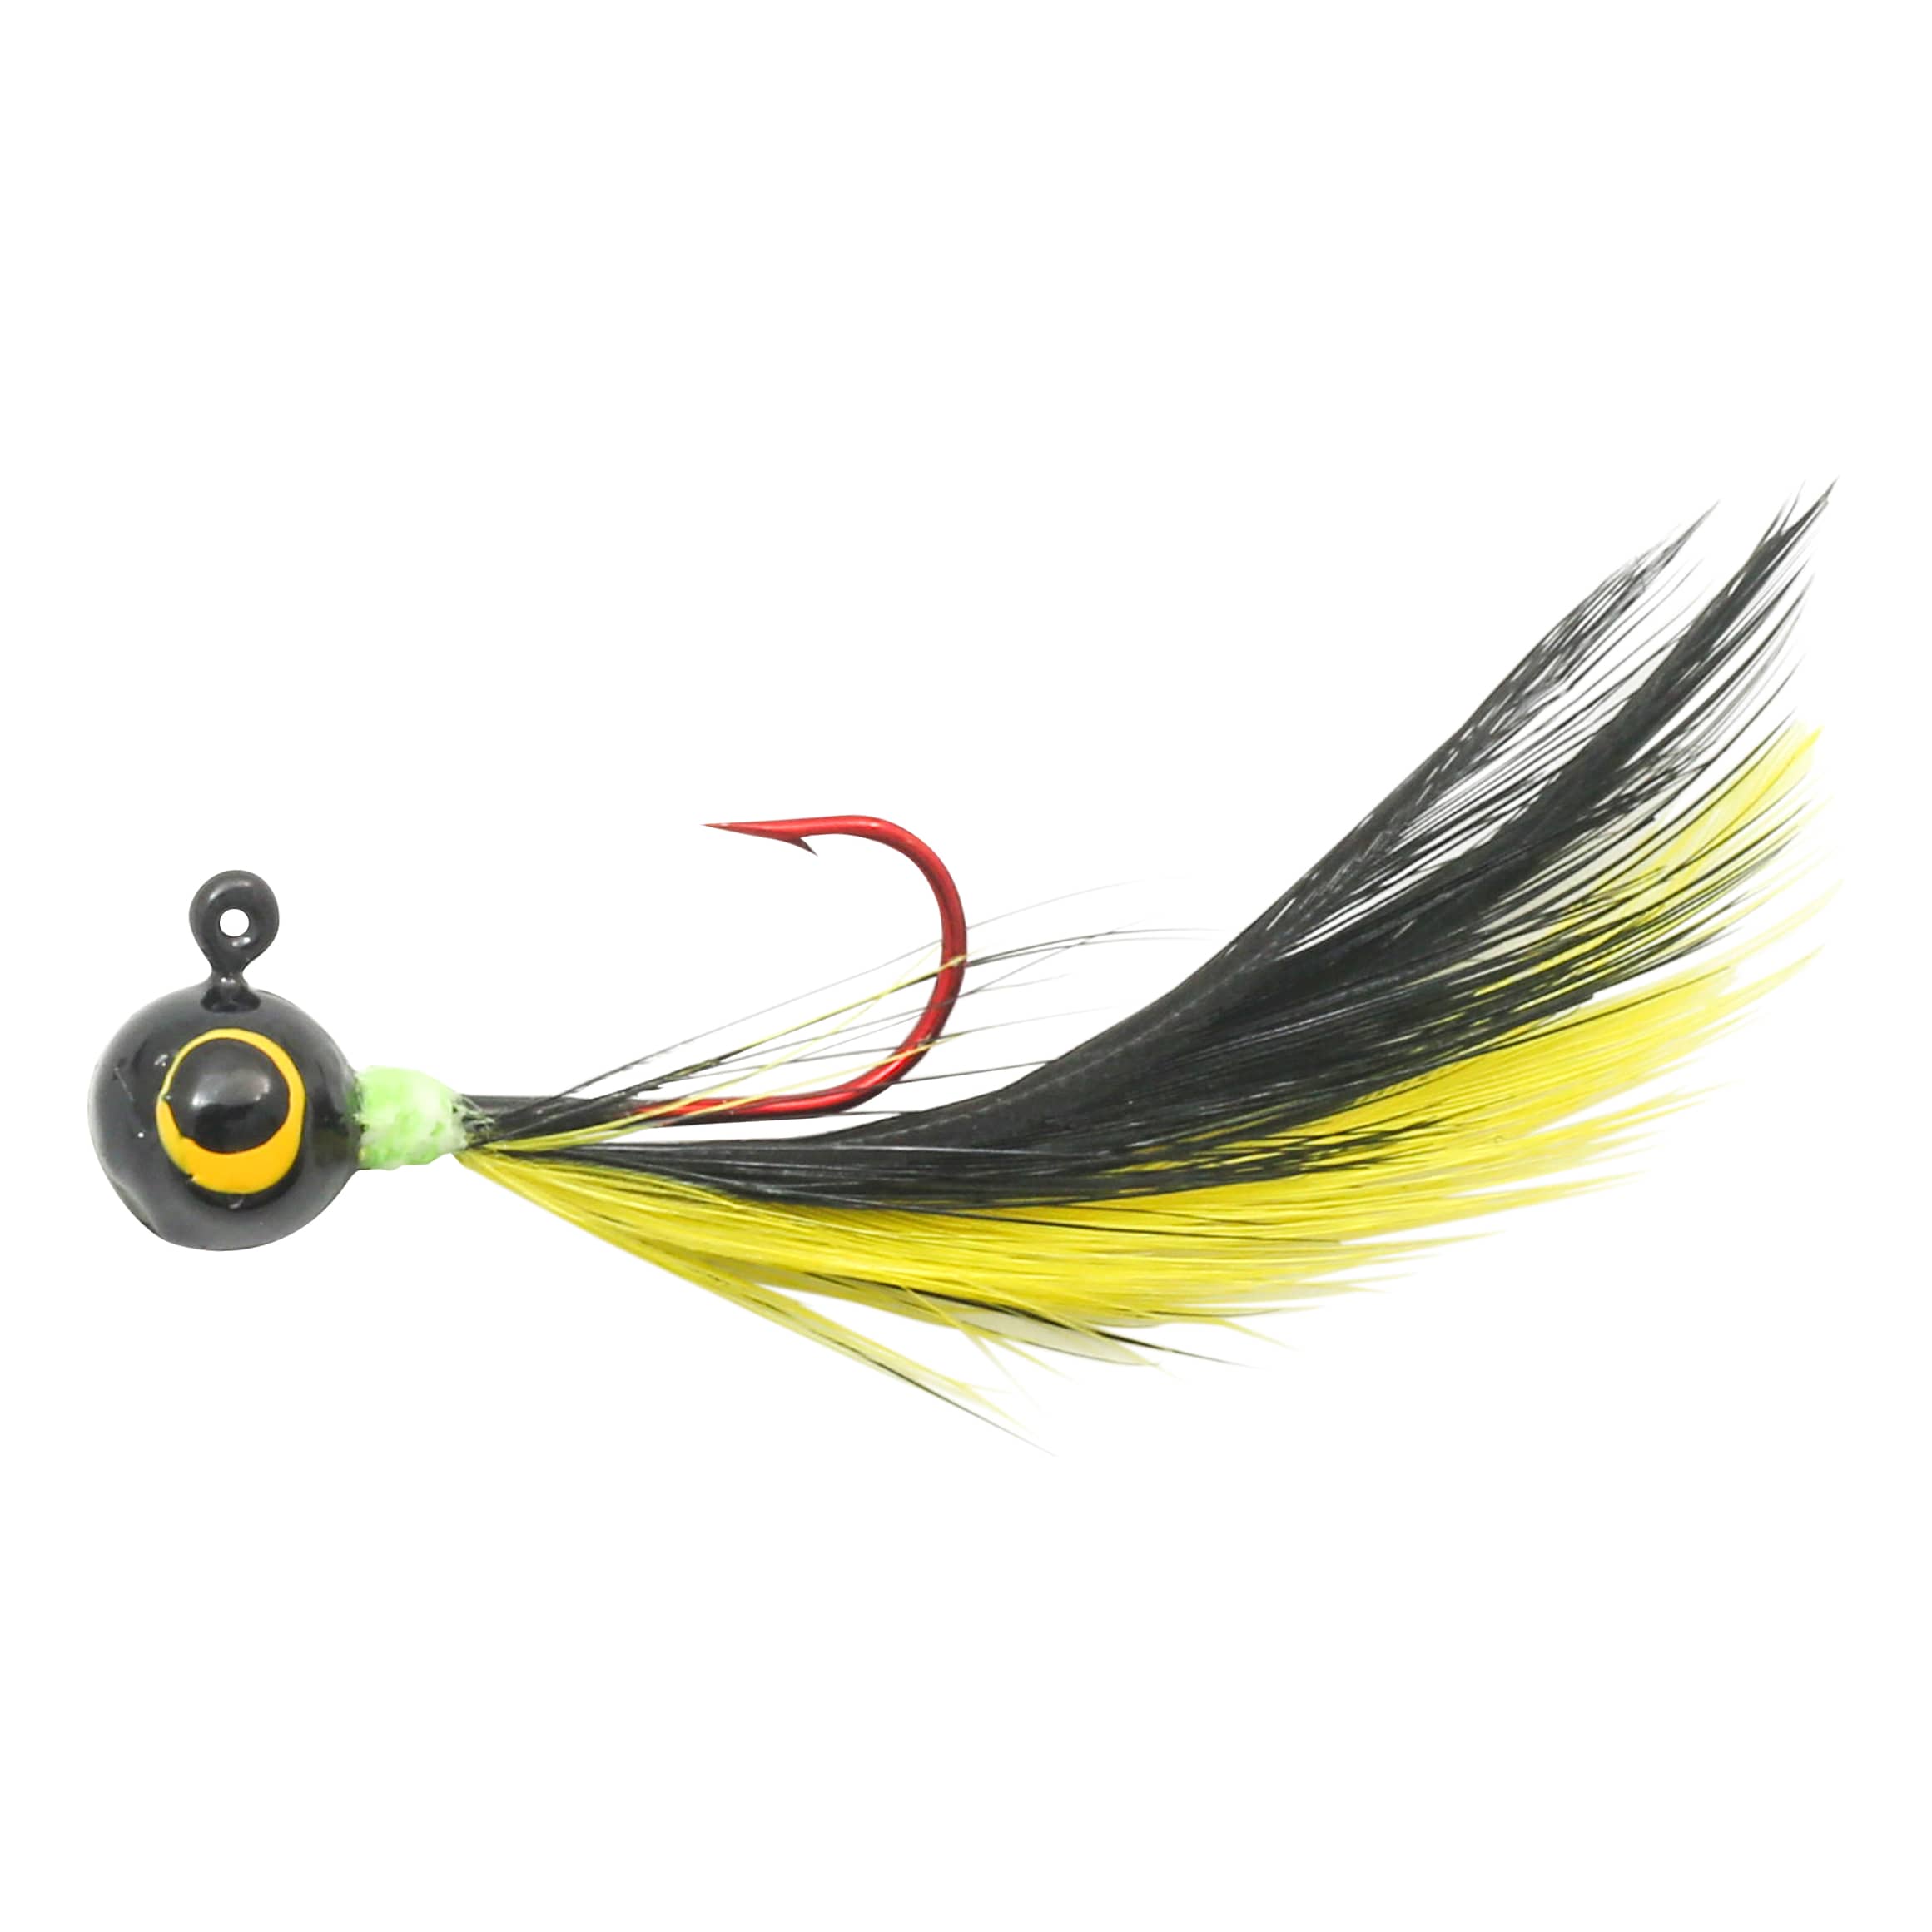 Northland® Fire-Fly Jig